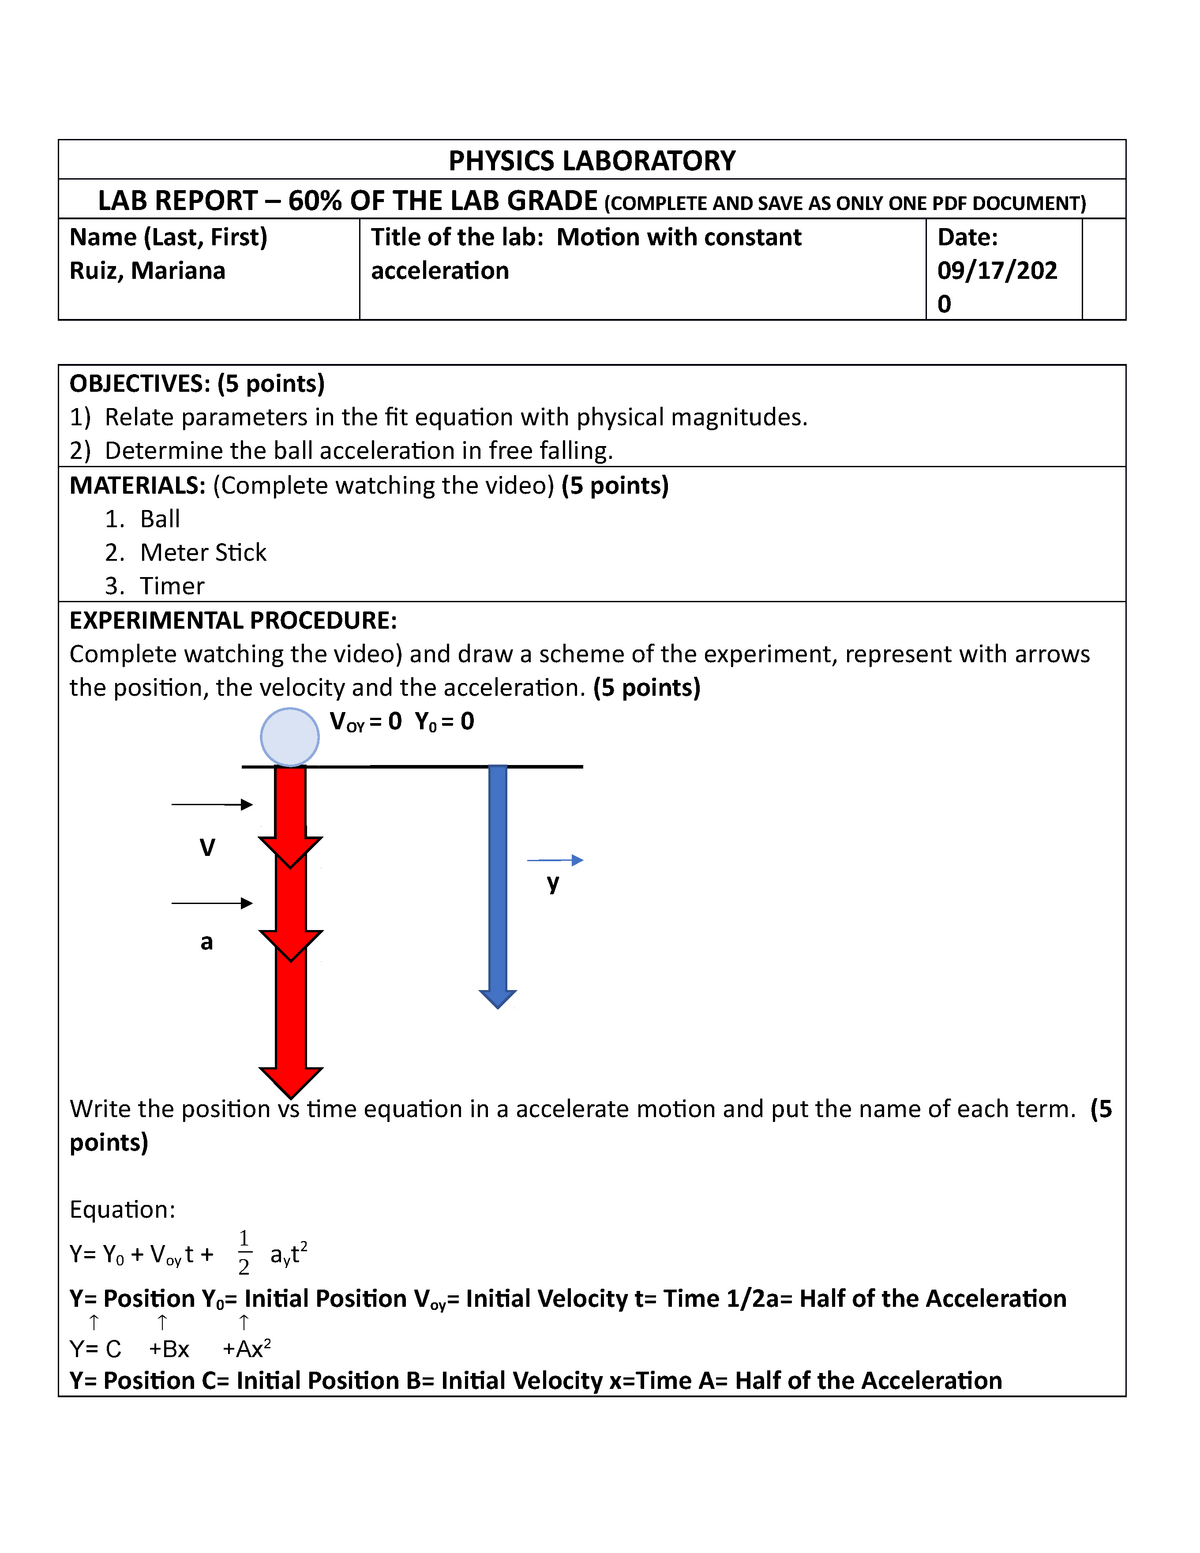 lab motion with constant acceleration assignment lab report active